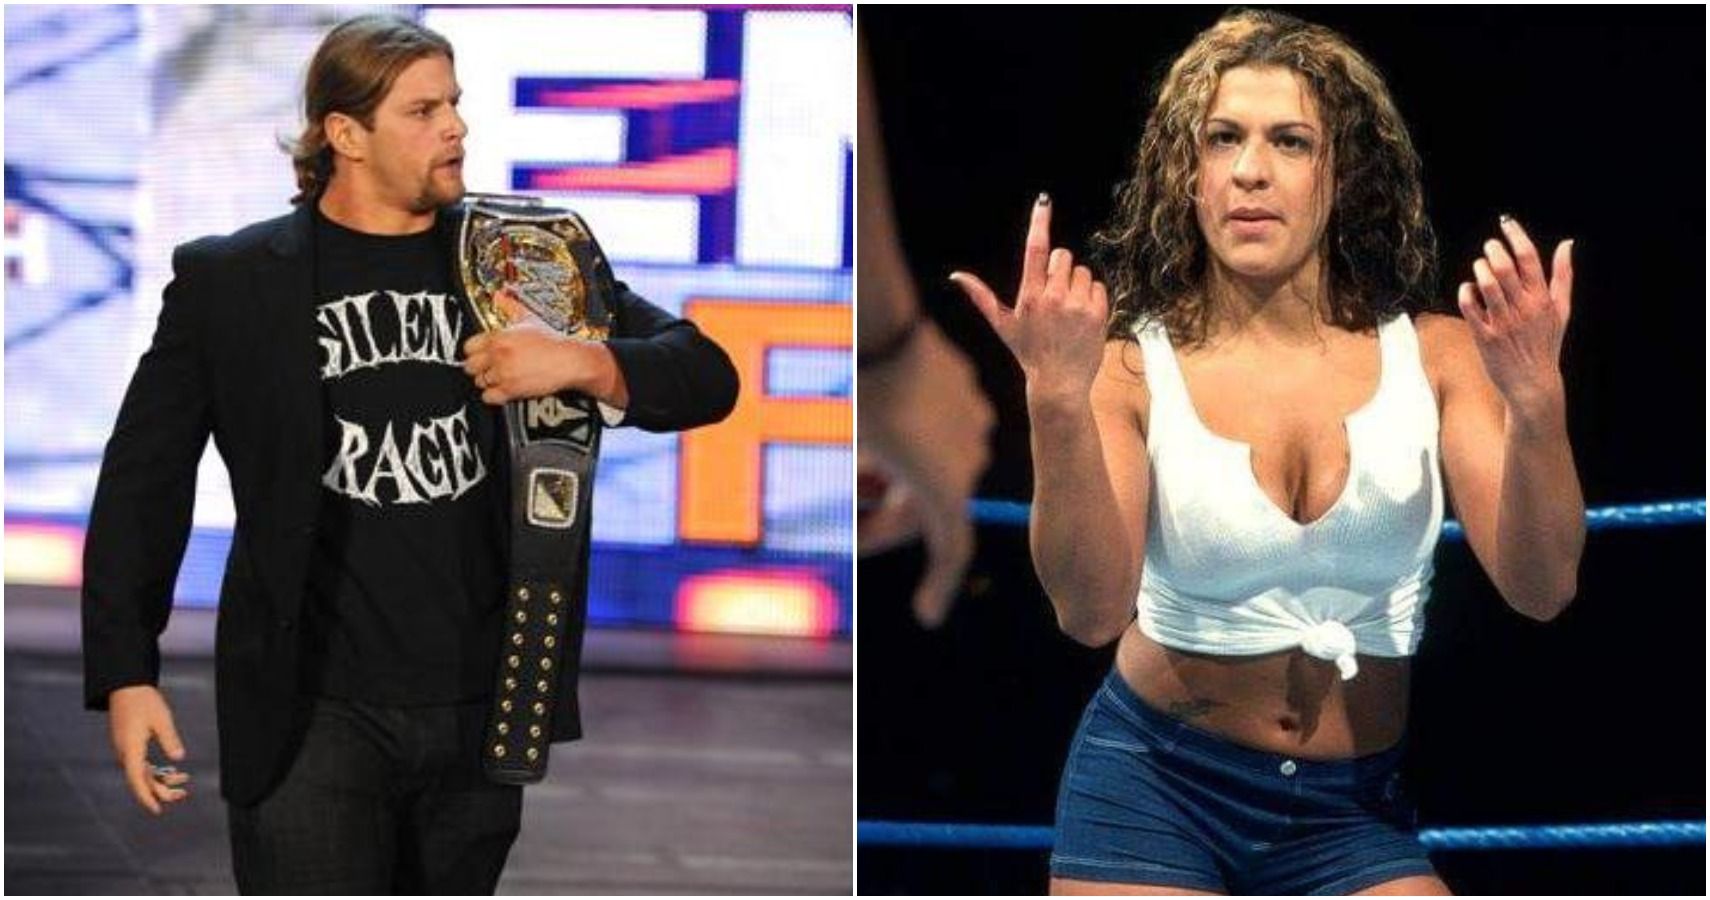 WWE Split Screen Image: Andy Leavine Holding A WWE Championship Title; Nidia Motioning To An Opponent